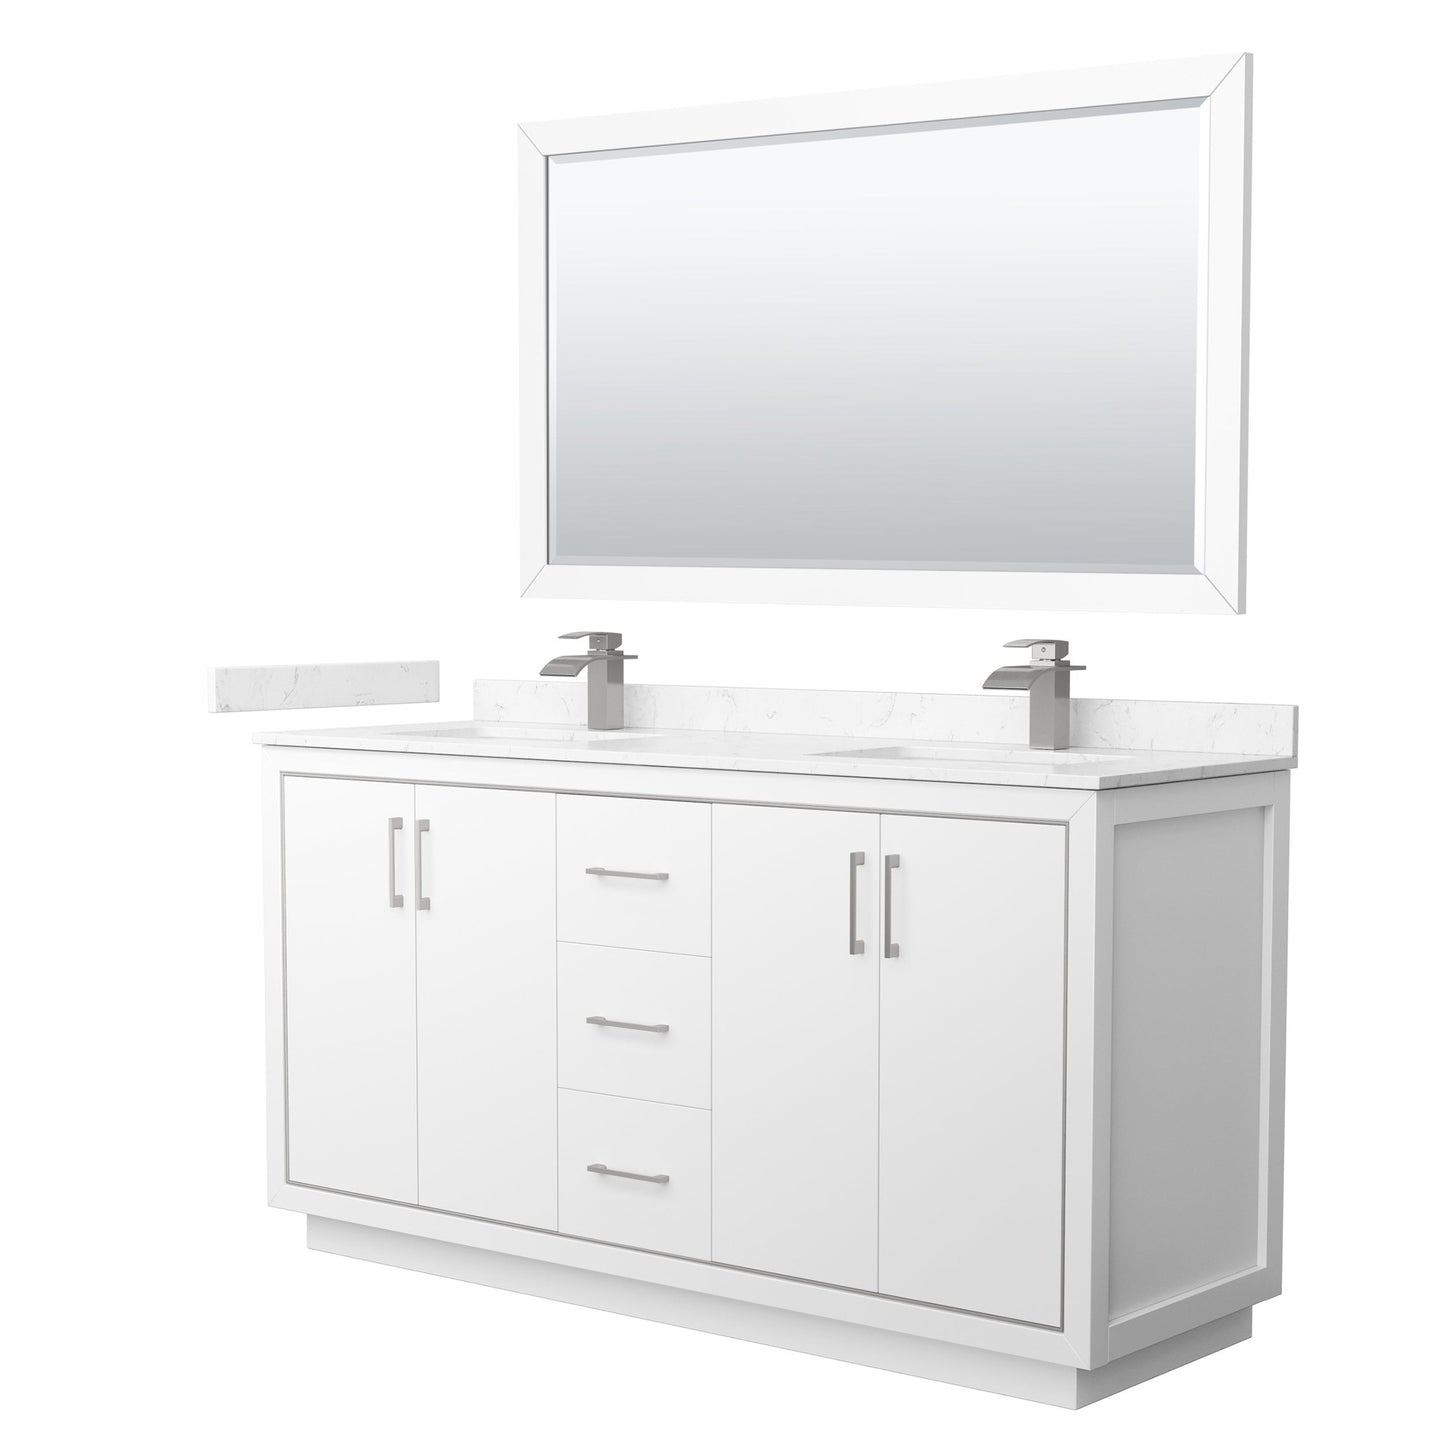 Wyndham Collection Icon 66" Double Bathroom Vanity in White, Carrara Cultured Marble Countertop, Undermount Square Sinks, Brushed Nickel Trim, 58" Mirror